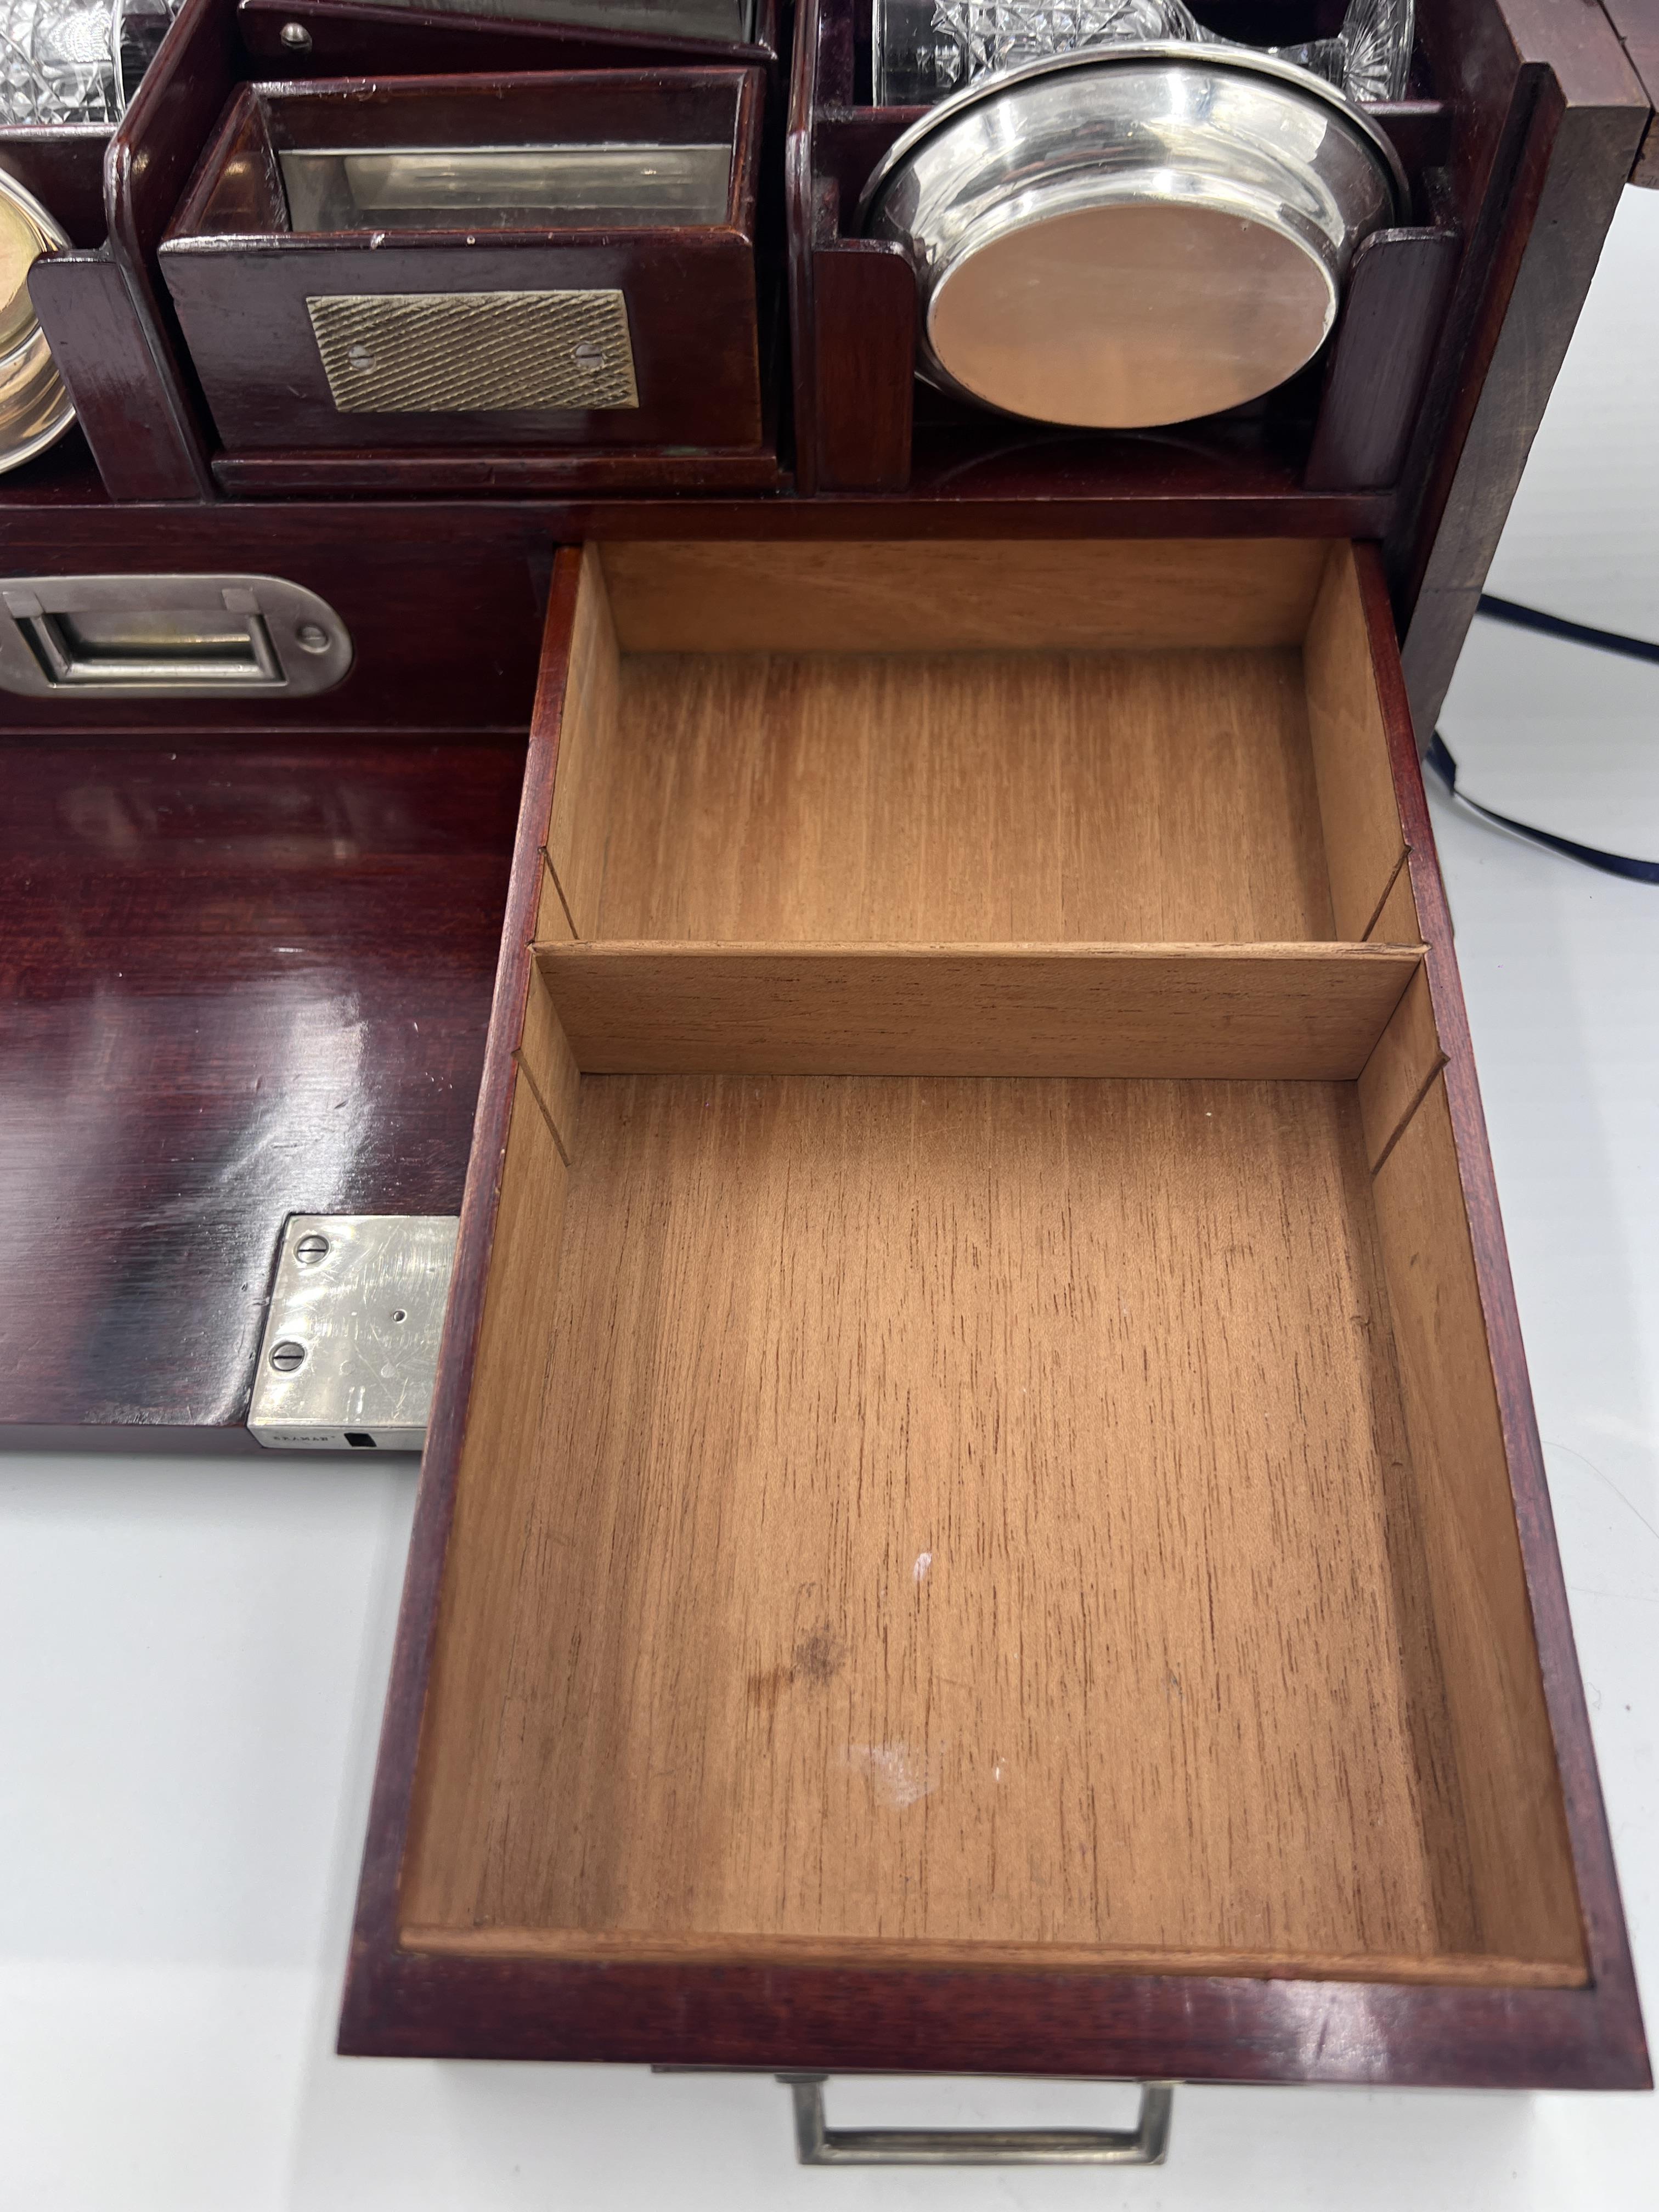 An Edwardian mahogany inlaid cut glass tantalus and games box containing cigar cutter, silver plated - Image 6 of 14